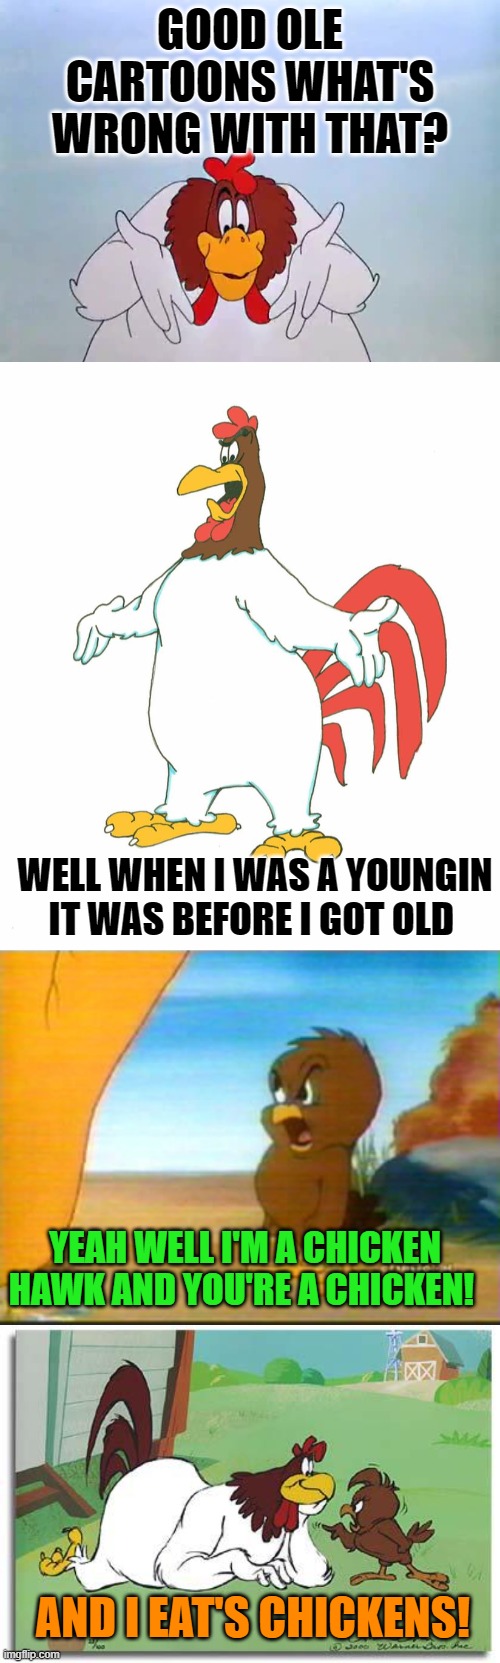 foghorn leghorn | GOOD OLE CARTOONS WHAT'S WRONG WITH THAT? WELL WHEN I WAS A YOUNGIN IT WAS BEFORE I GOT OLD; YEAH WELL I'M A CHICKEN HAWK AND YOU'RE A CHICKEN! AND I EAT'S CHICKENS! | image tagged in foghorn leghorn,kewlew | made w/ Imgflip meme maker